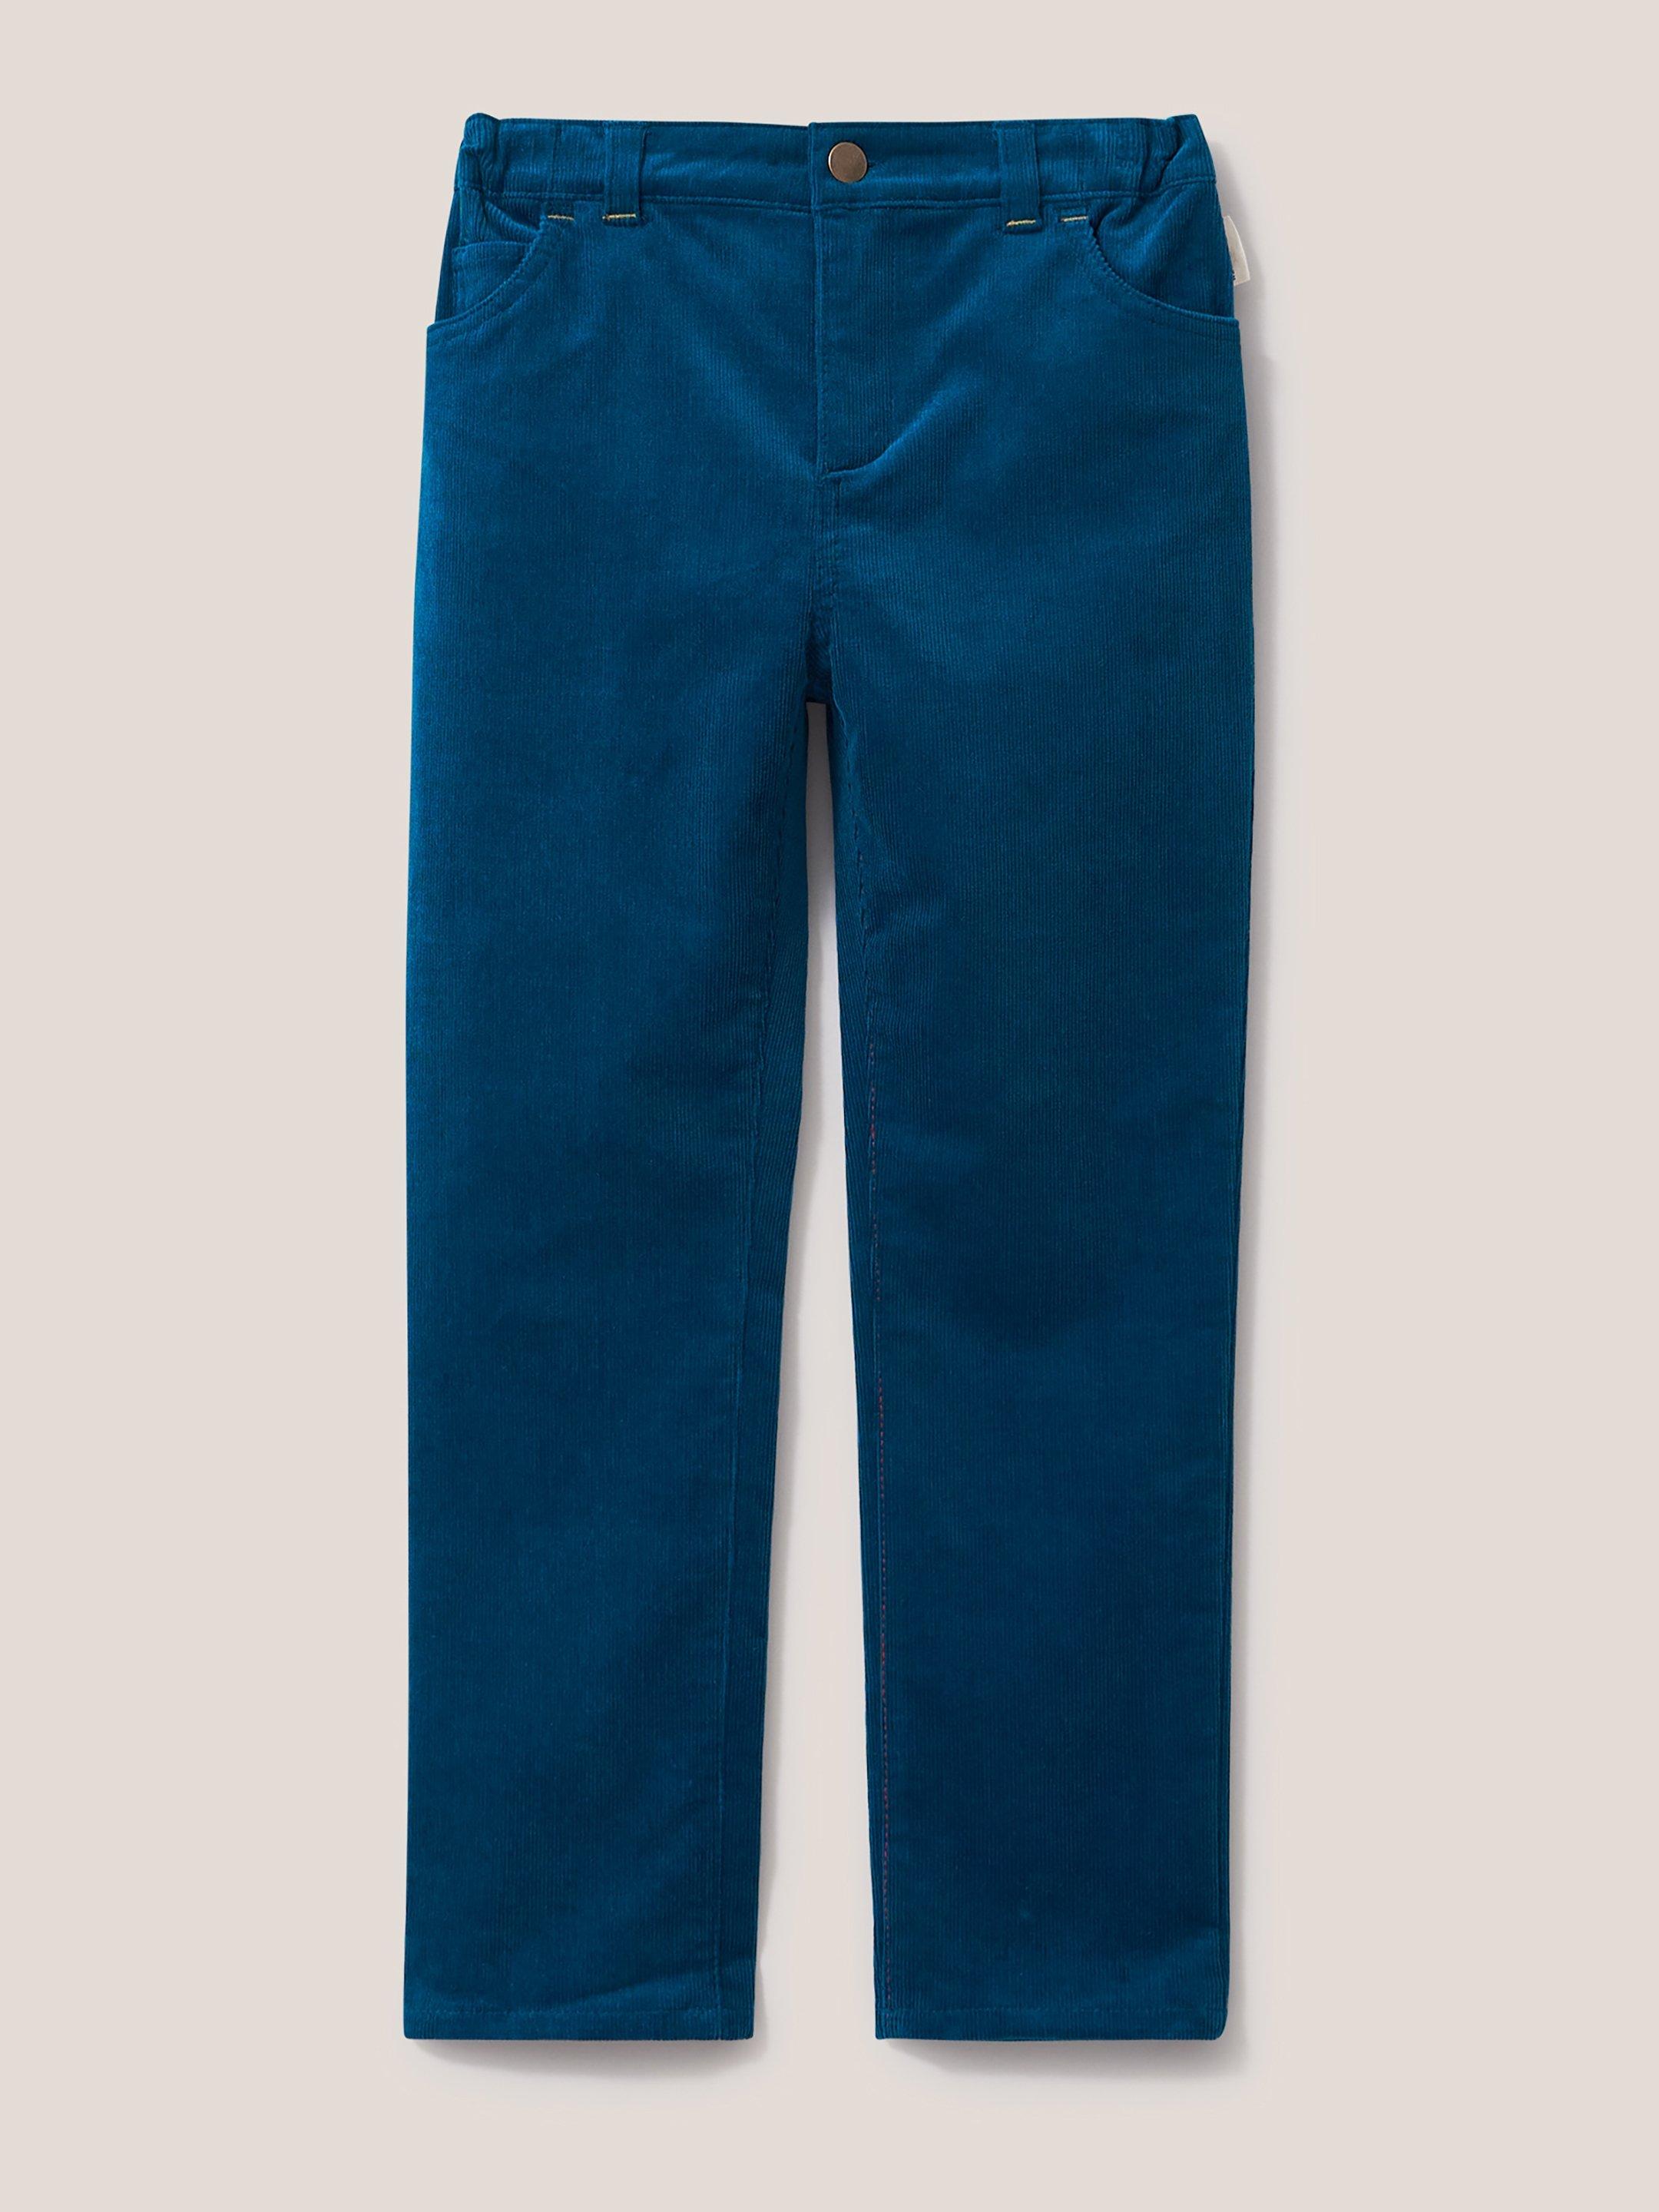 Coen Cord Trouser in MID TEAL - FLAT FRONT